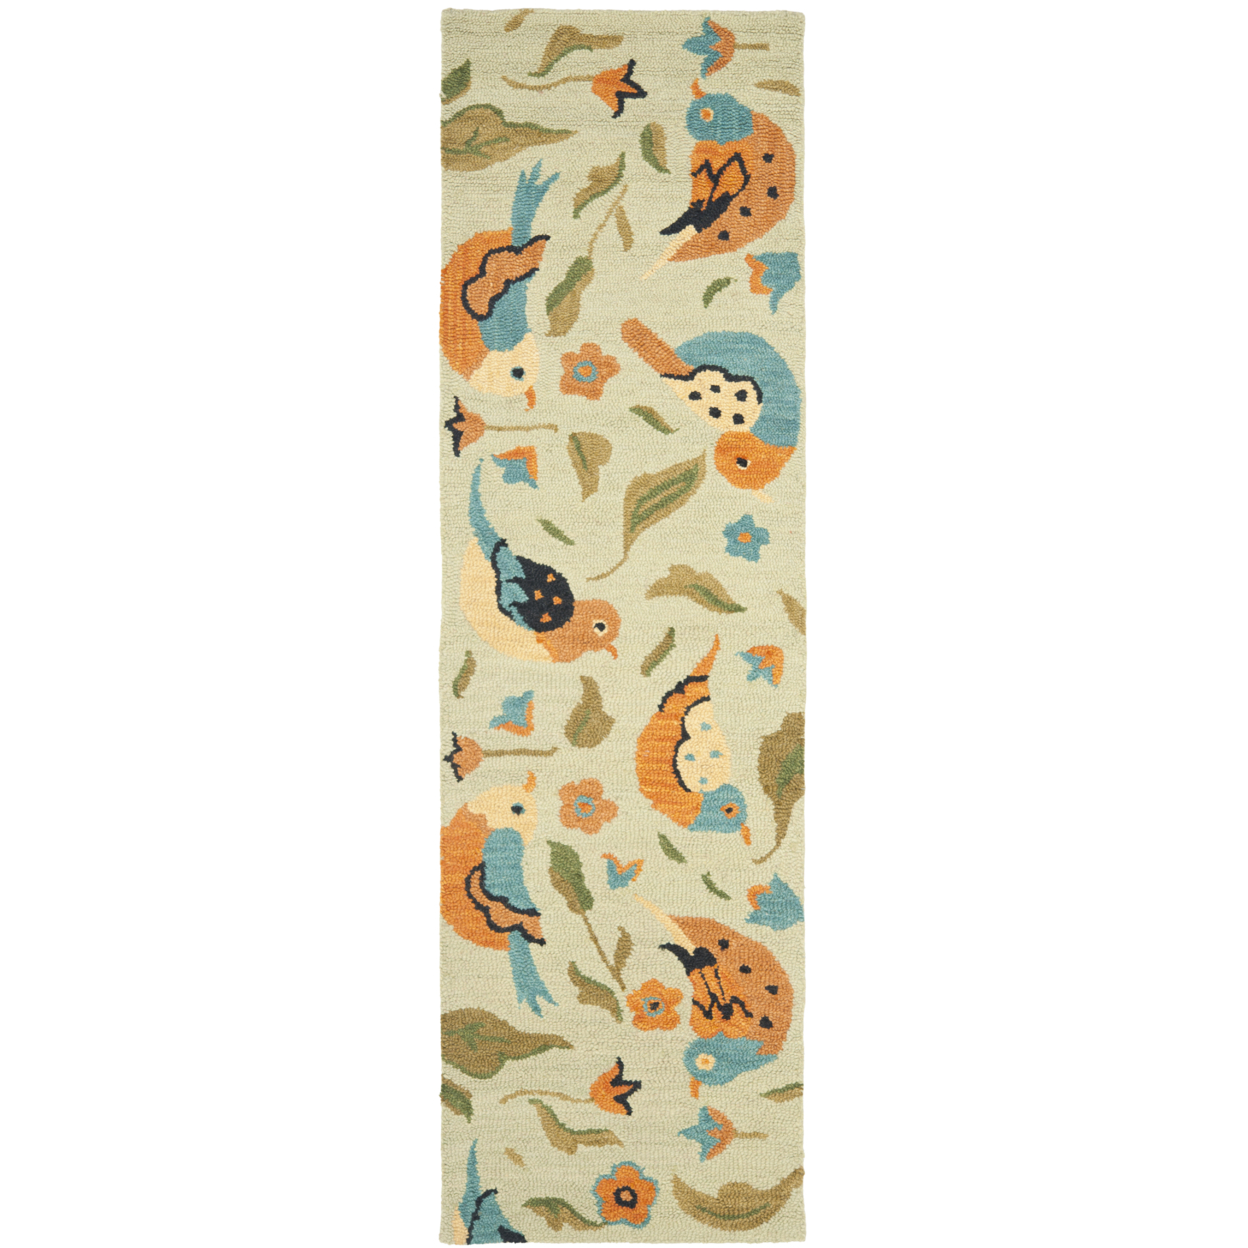 SAFAVIEH Blossom BLM676A Hand-hooked Sage / Multi Rug - 6' X 9'